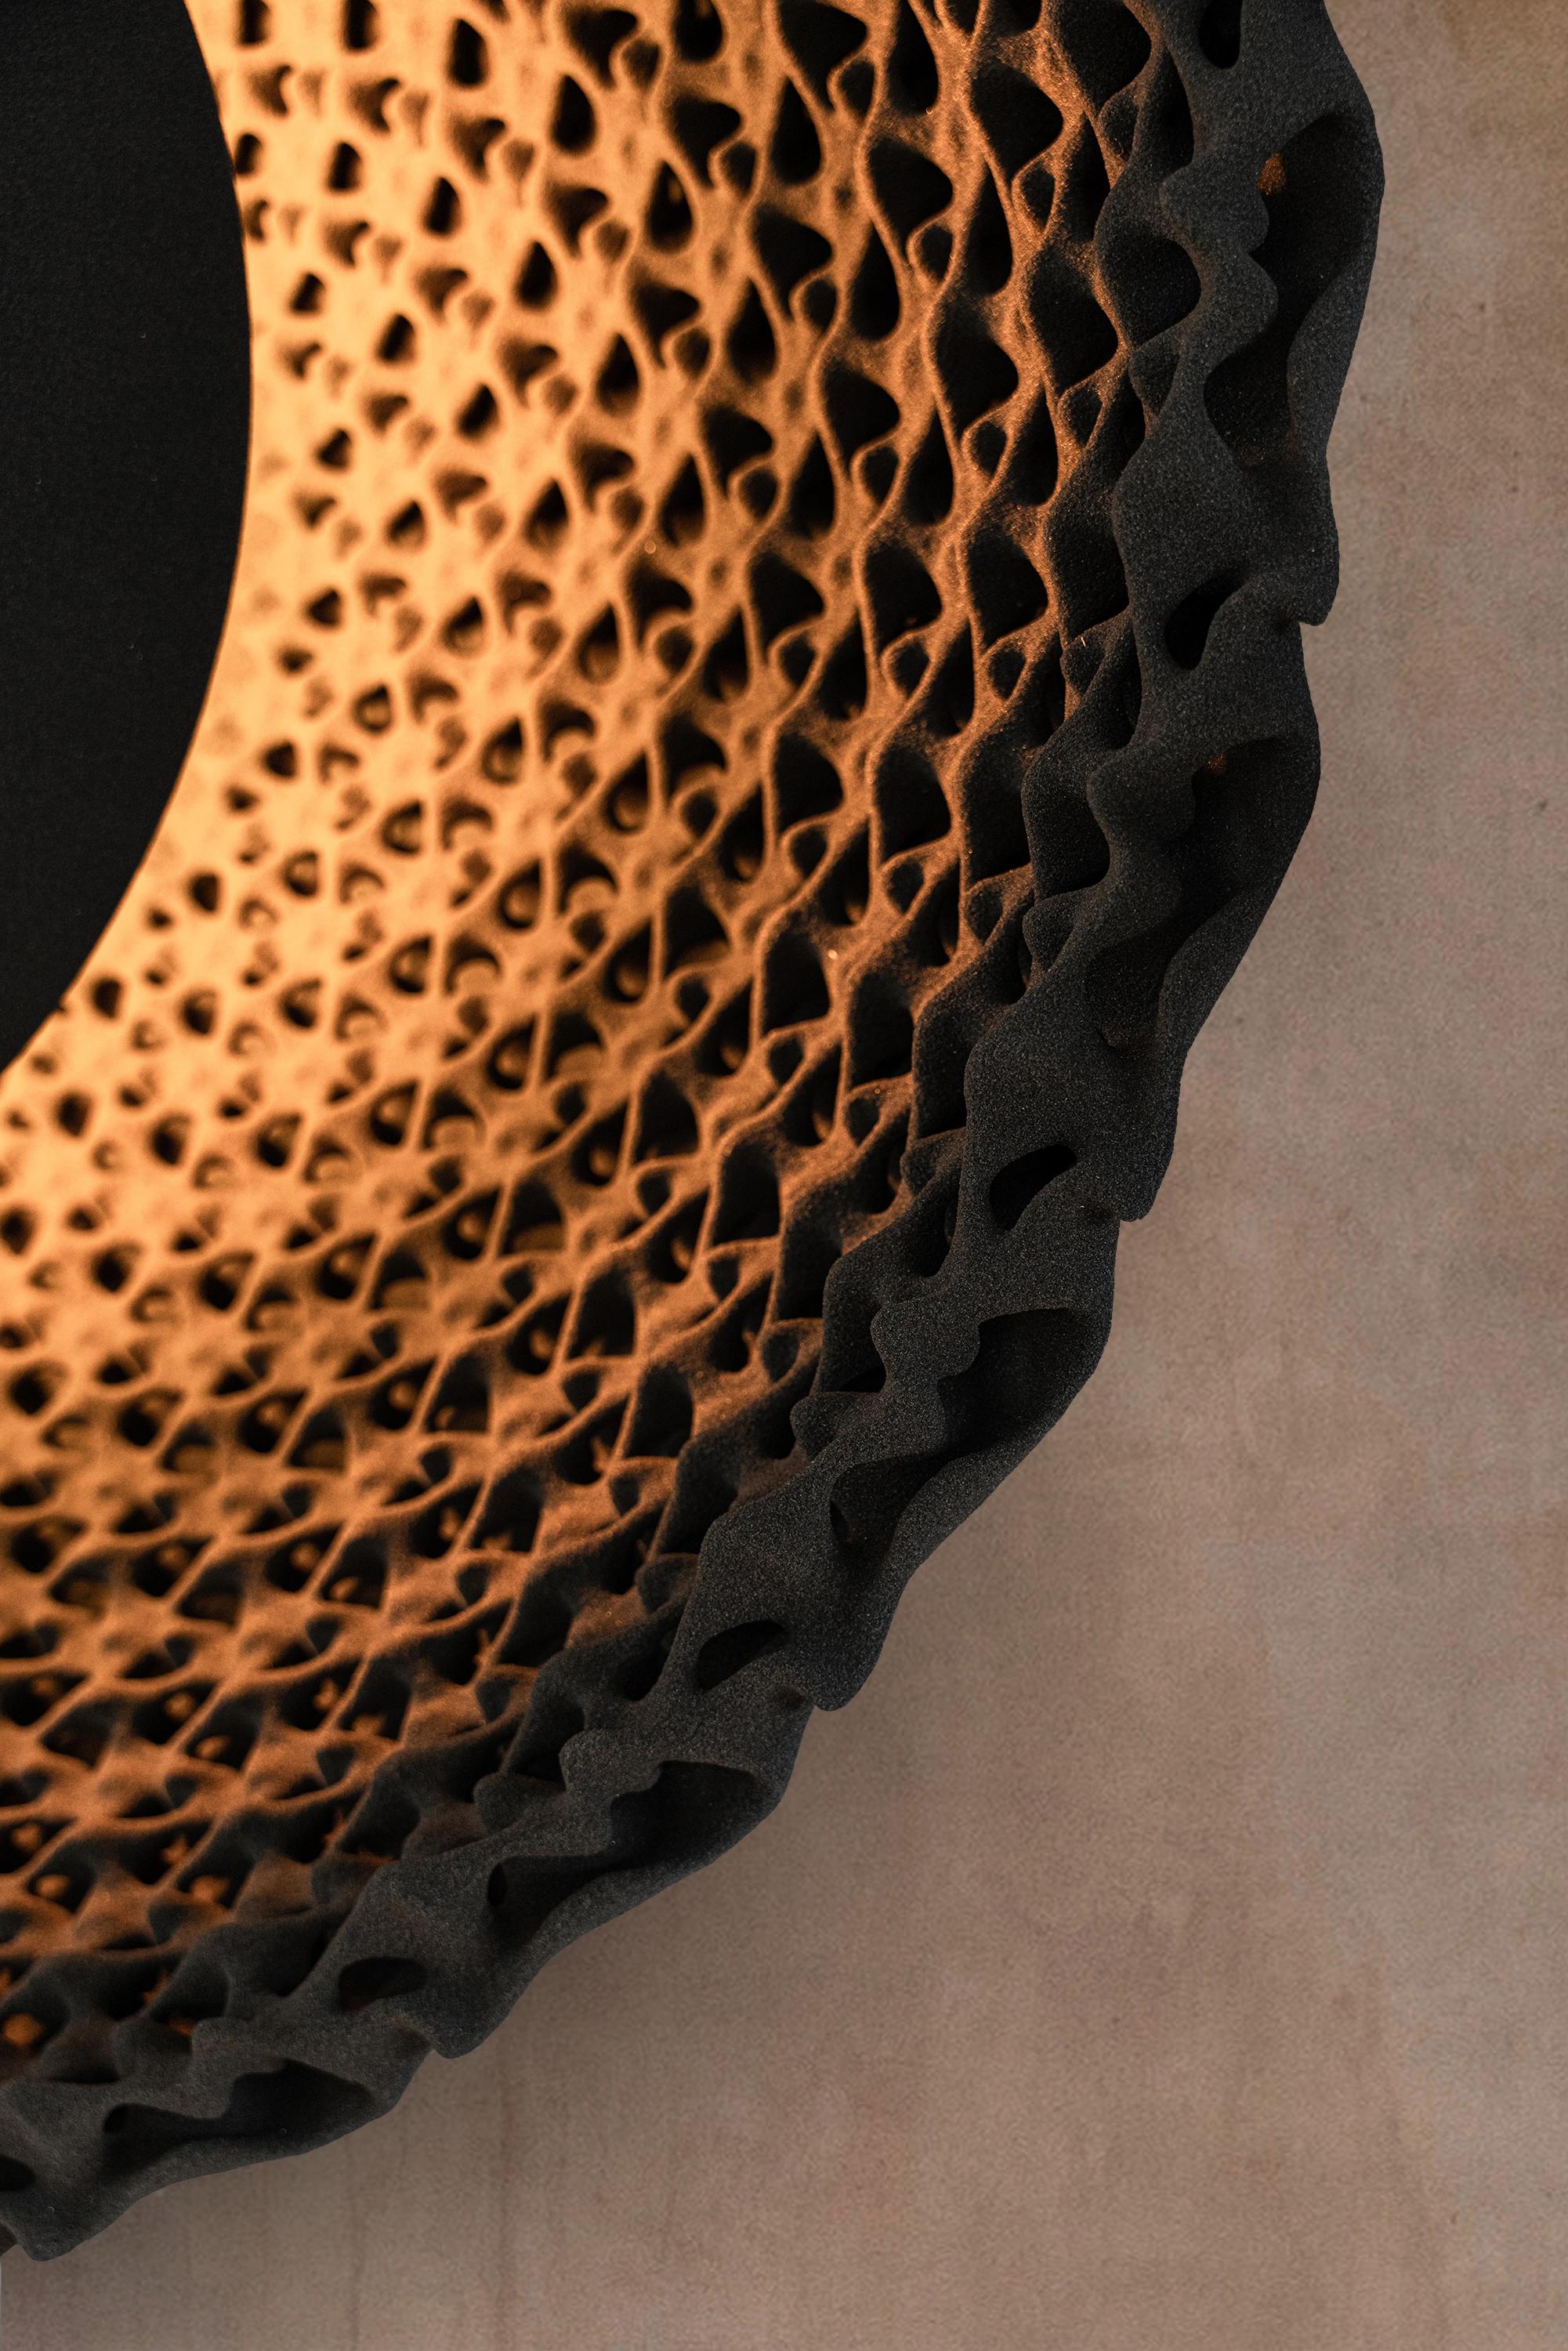 Contemporary Sun Wall Lamp, 3D-Printed Sand, Sculptural Organic, Ambient Mood Lighting For Sale